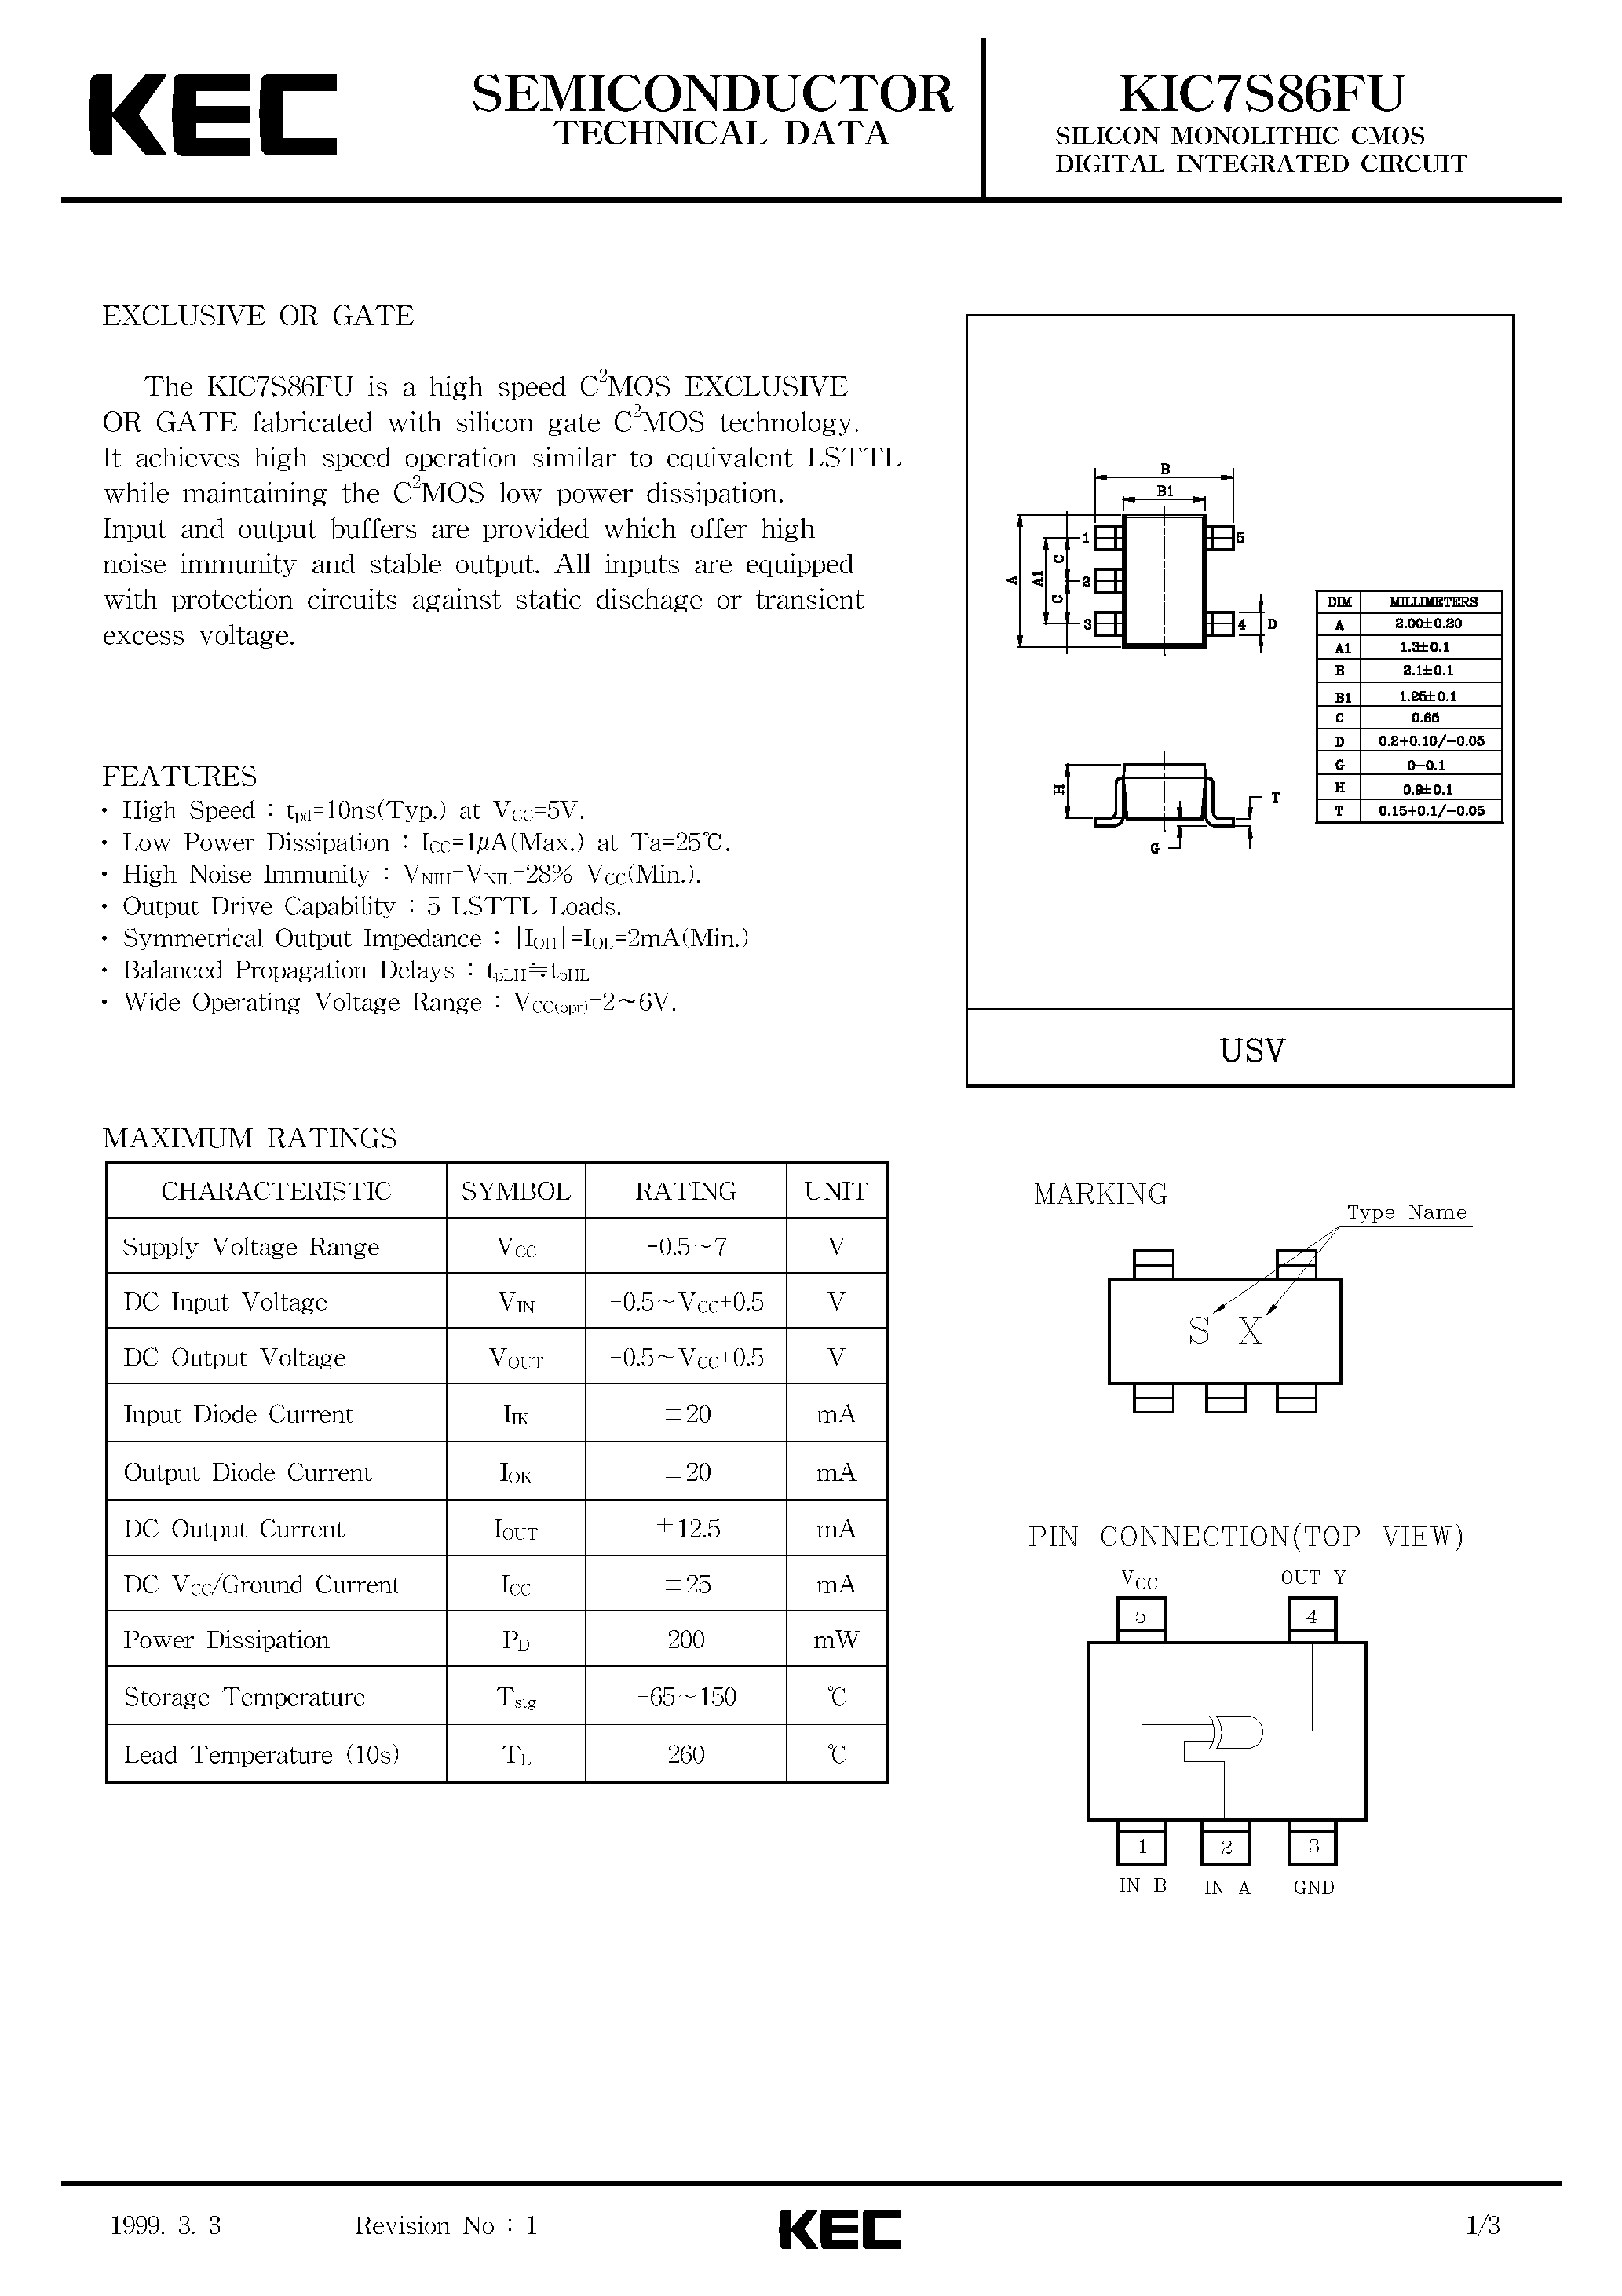 Datasheet KIC7S86FU - SILICON MONOLITHIC CMOS DIGITAL INTEGRATED CIRCUIT(EXCLUSIVE OR GATE) page 1